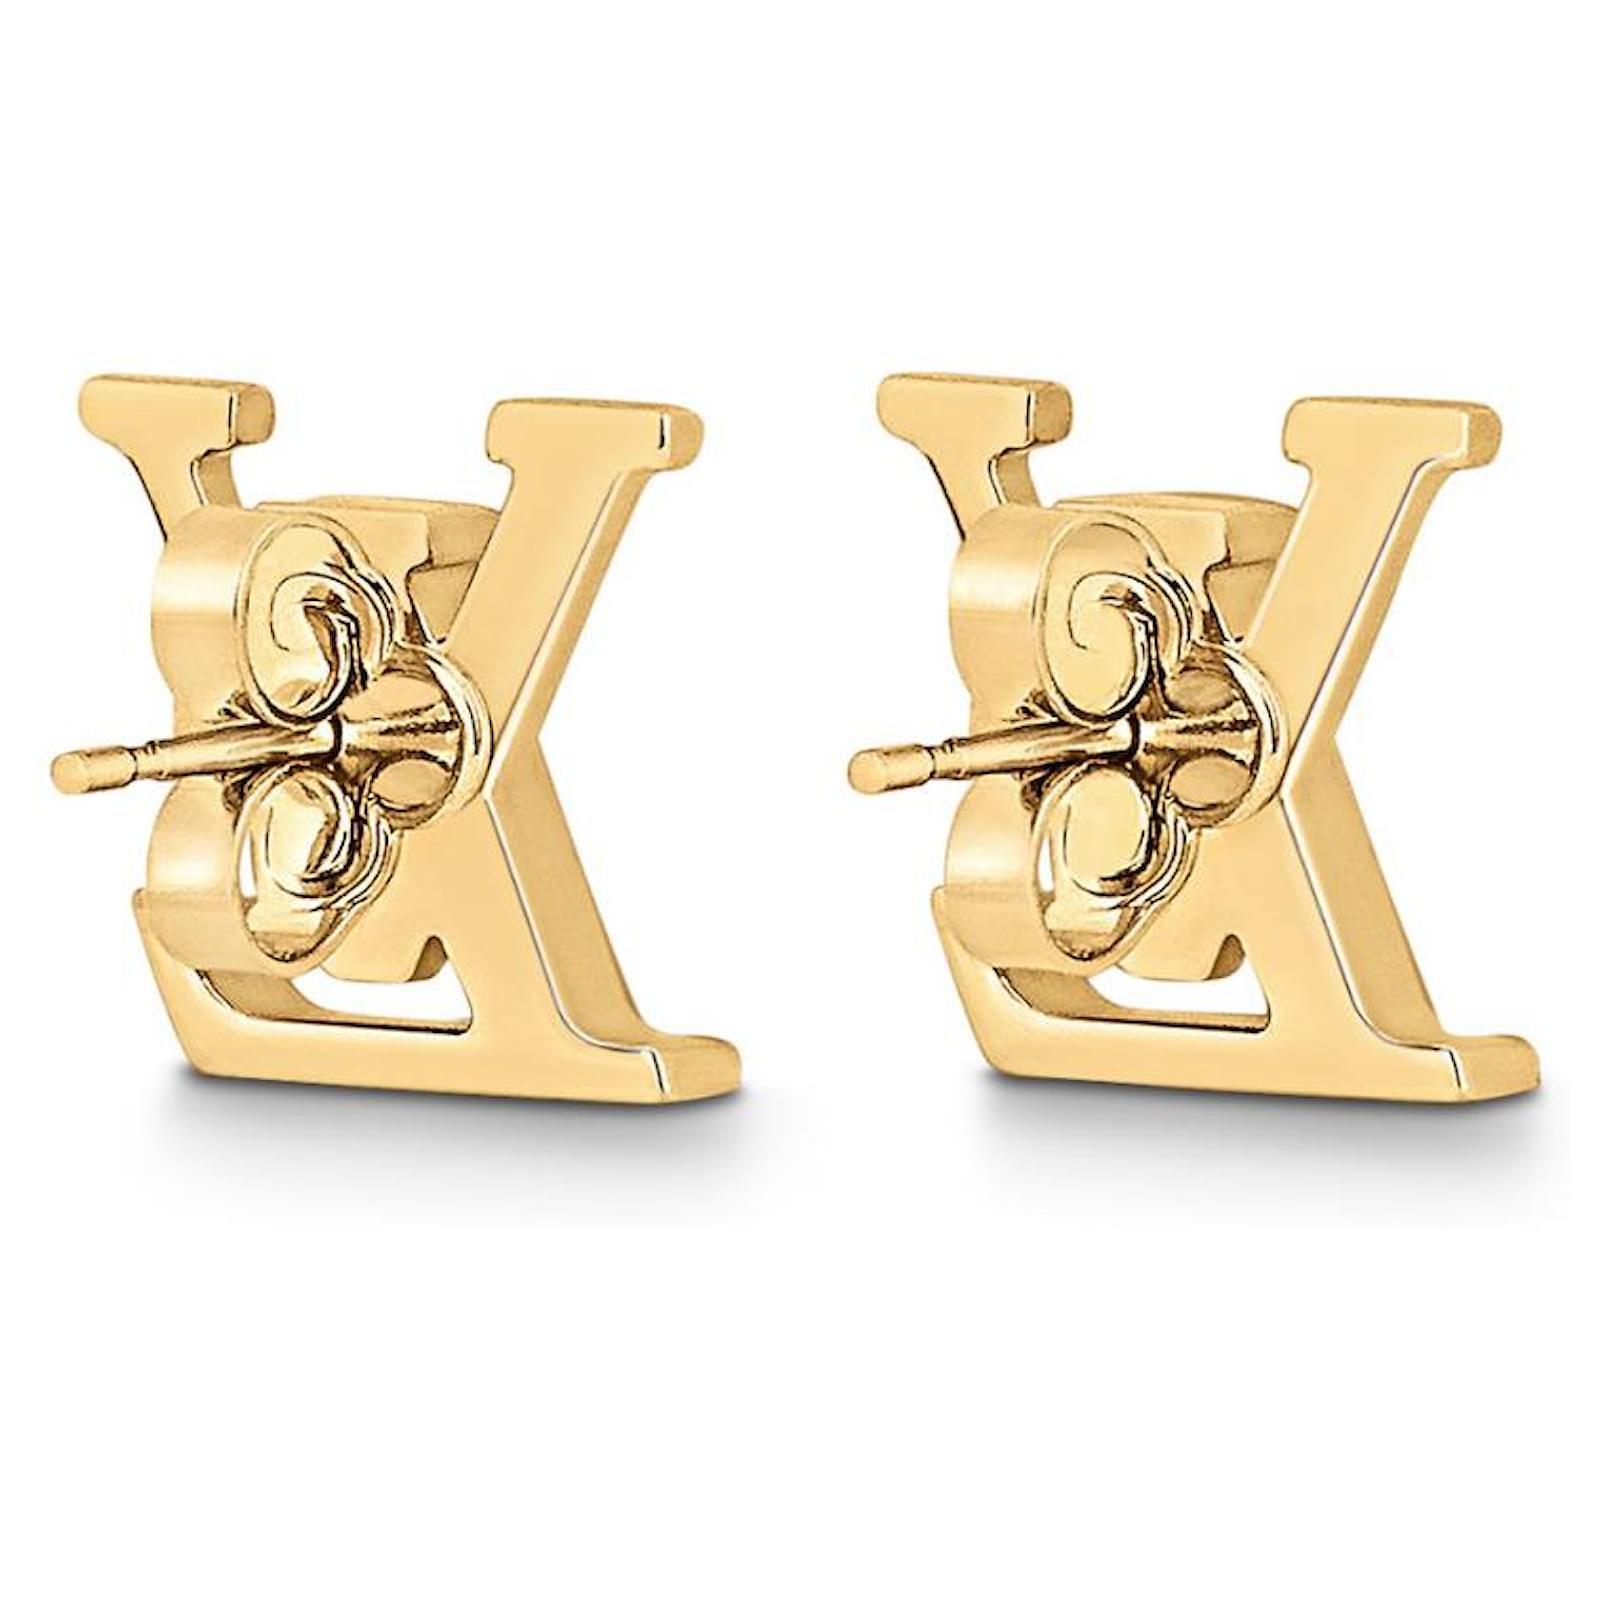 NEW LOUIS VUITTON EARRING ICONIC M00986 METAL PINK GOLD